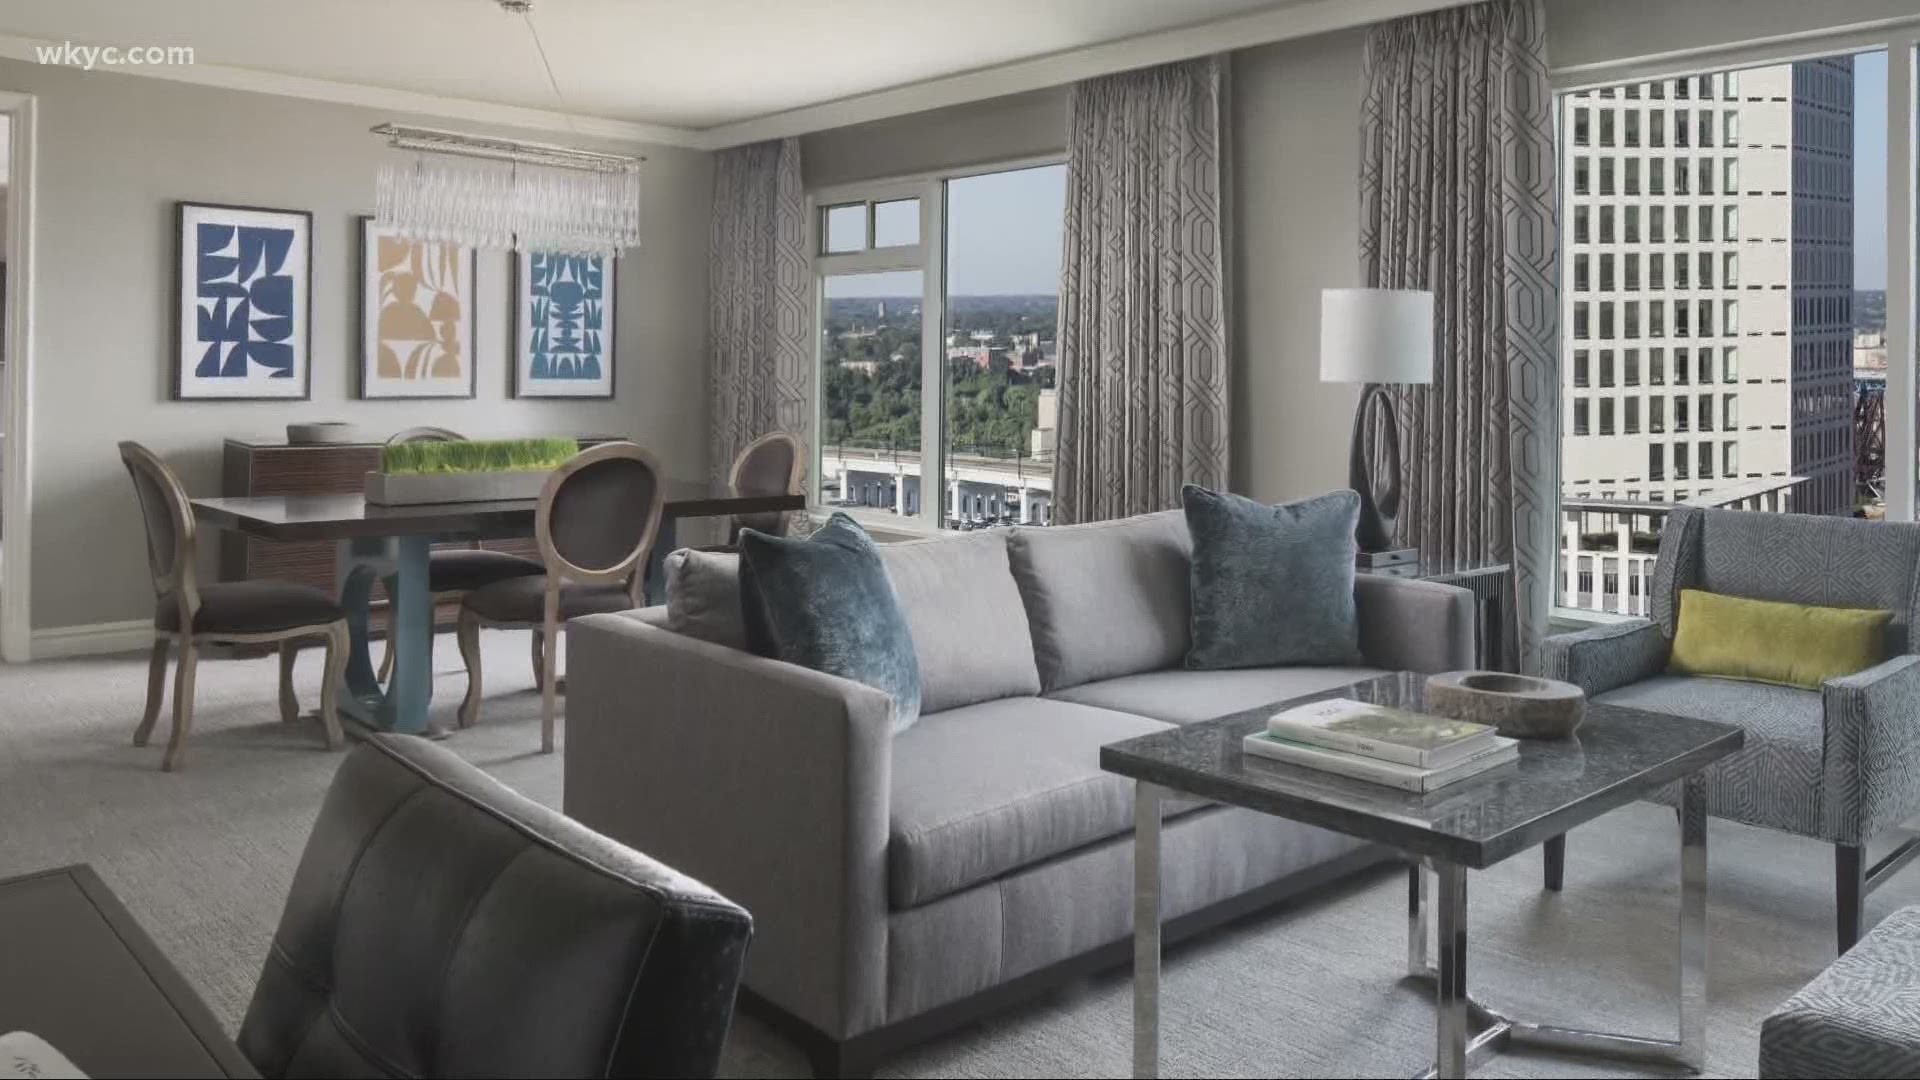 Aug. 26, 2020: The Ritz-Carlton in Cleveland is offering its own remote learning option -- and it's all in luxury. 3News' Austin Love explains how it works.